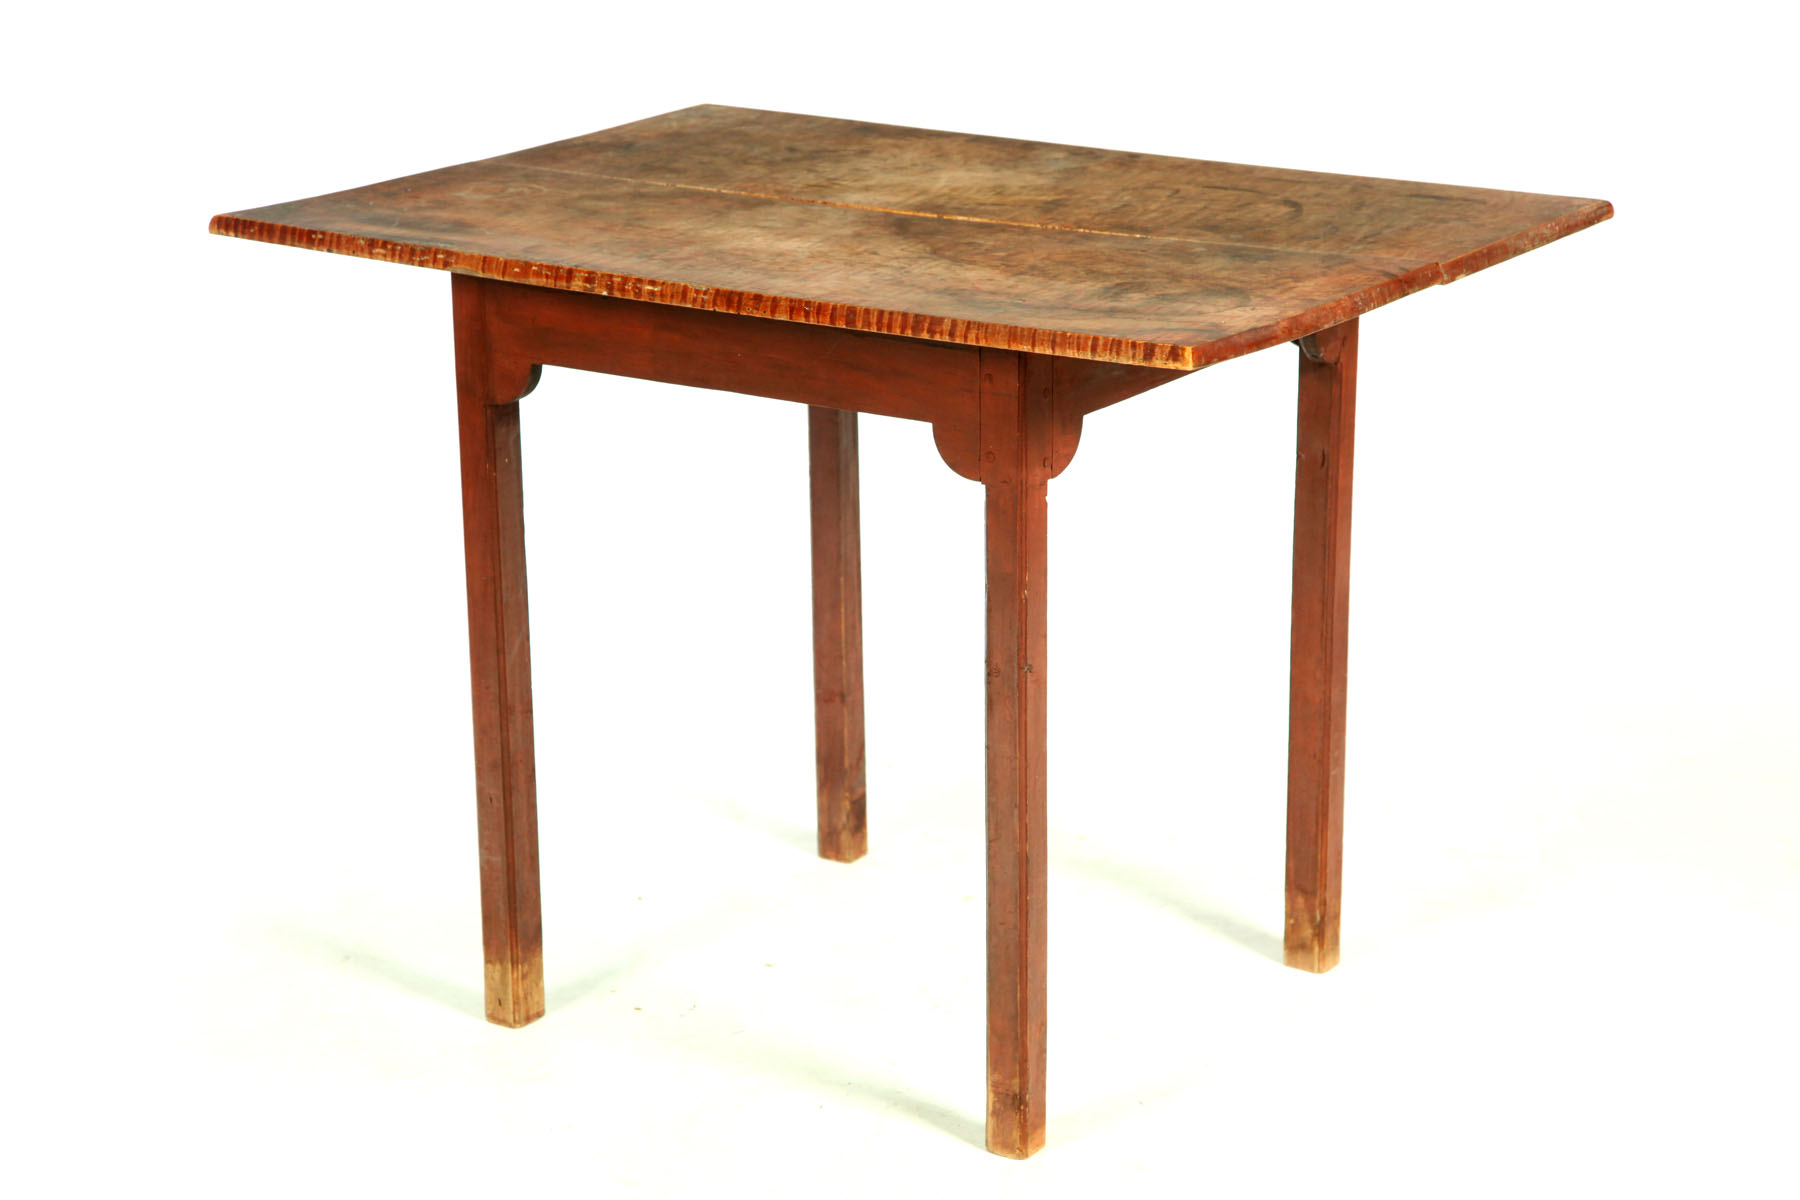 CHIPPENDALE TAVERN TABLE New 11707a